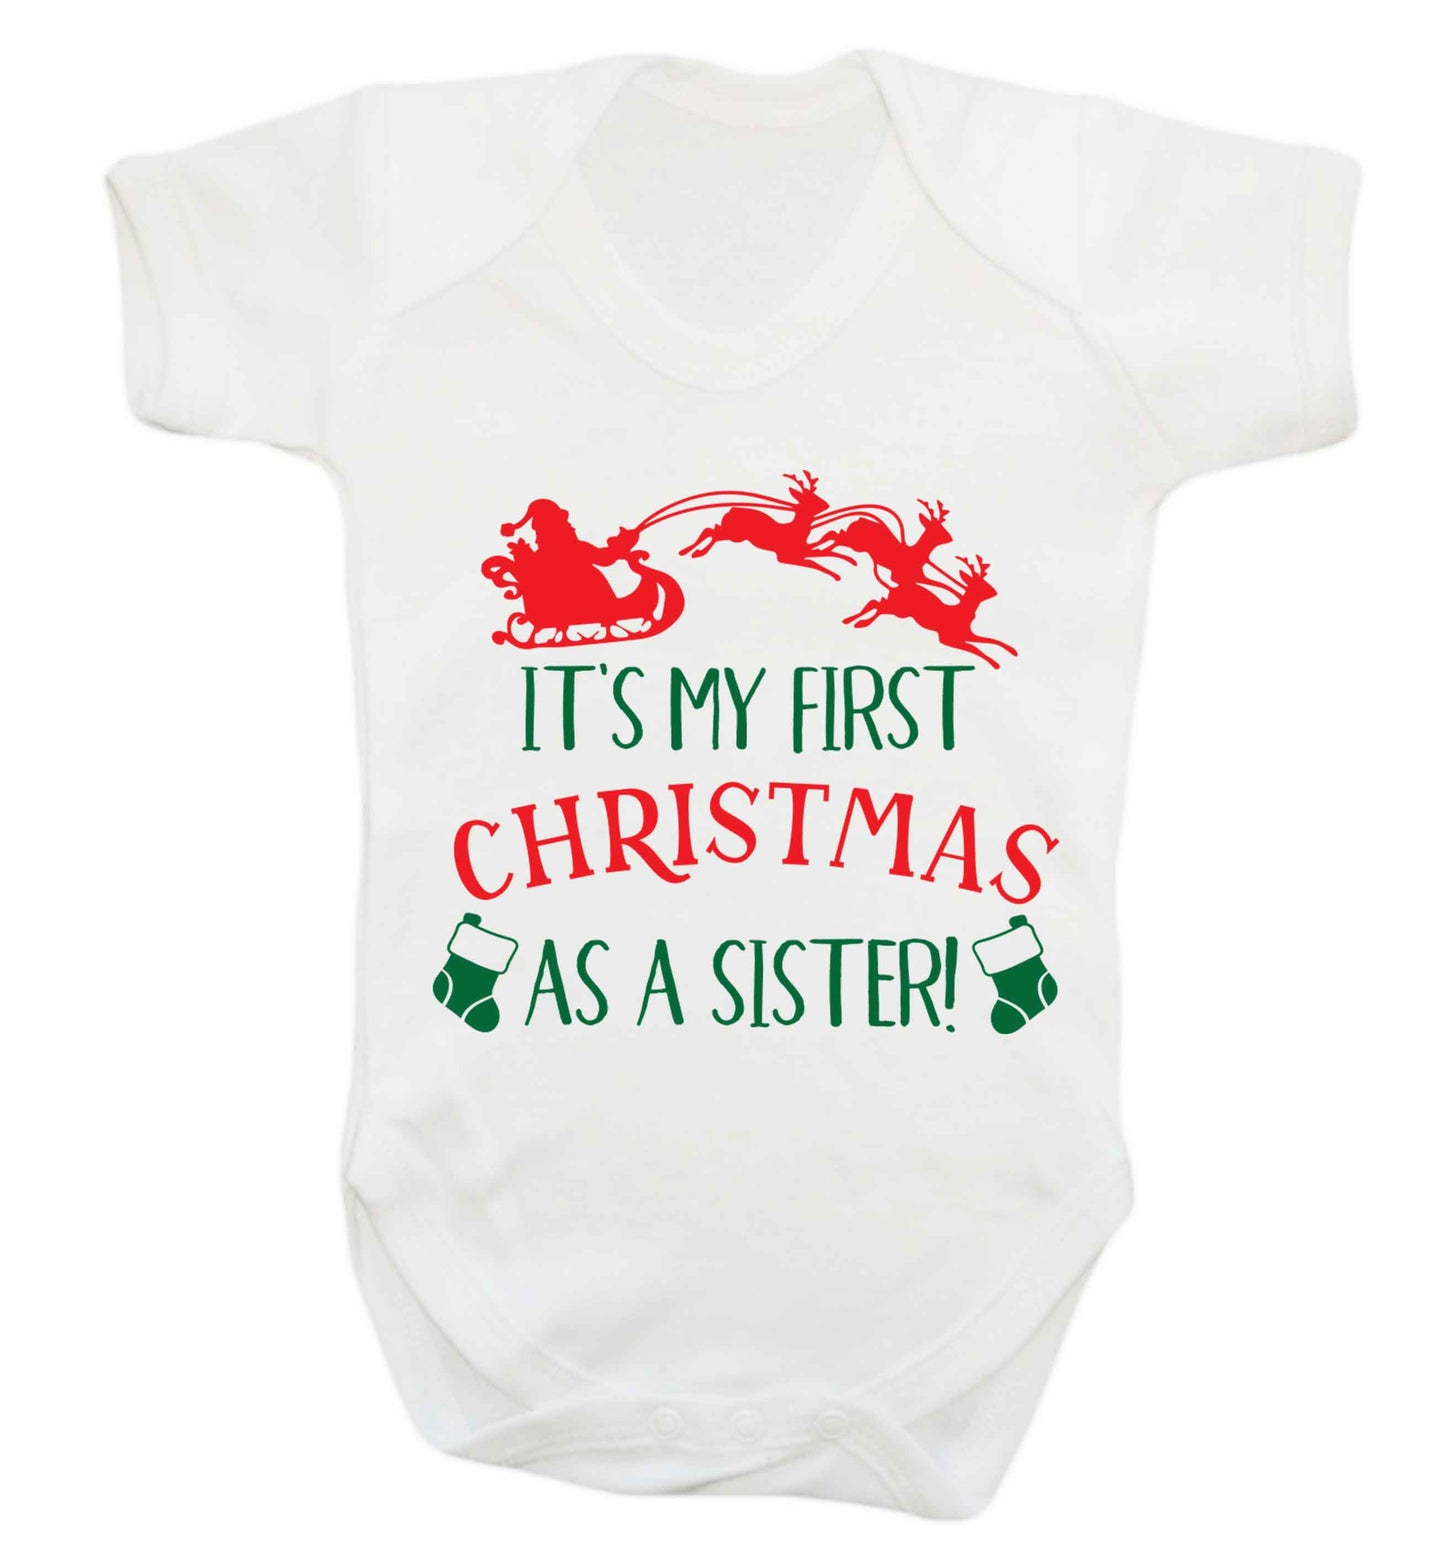 It's my first Christmas as a sister! Baby Vest white 18-24 months